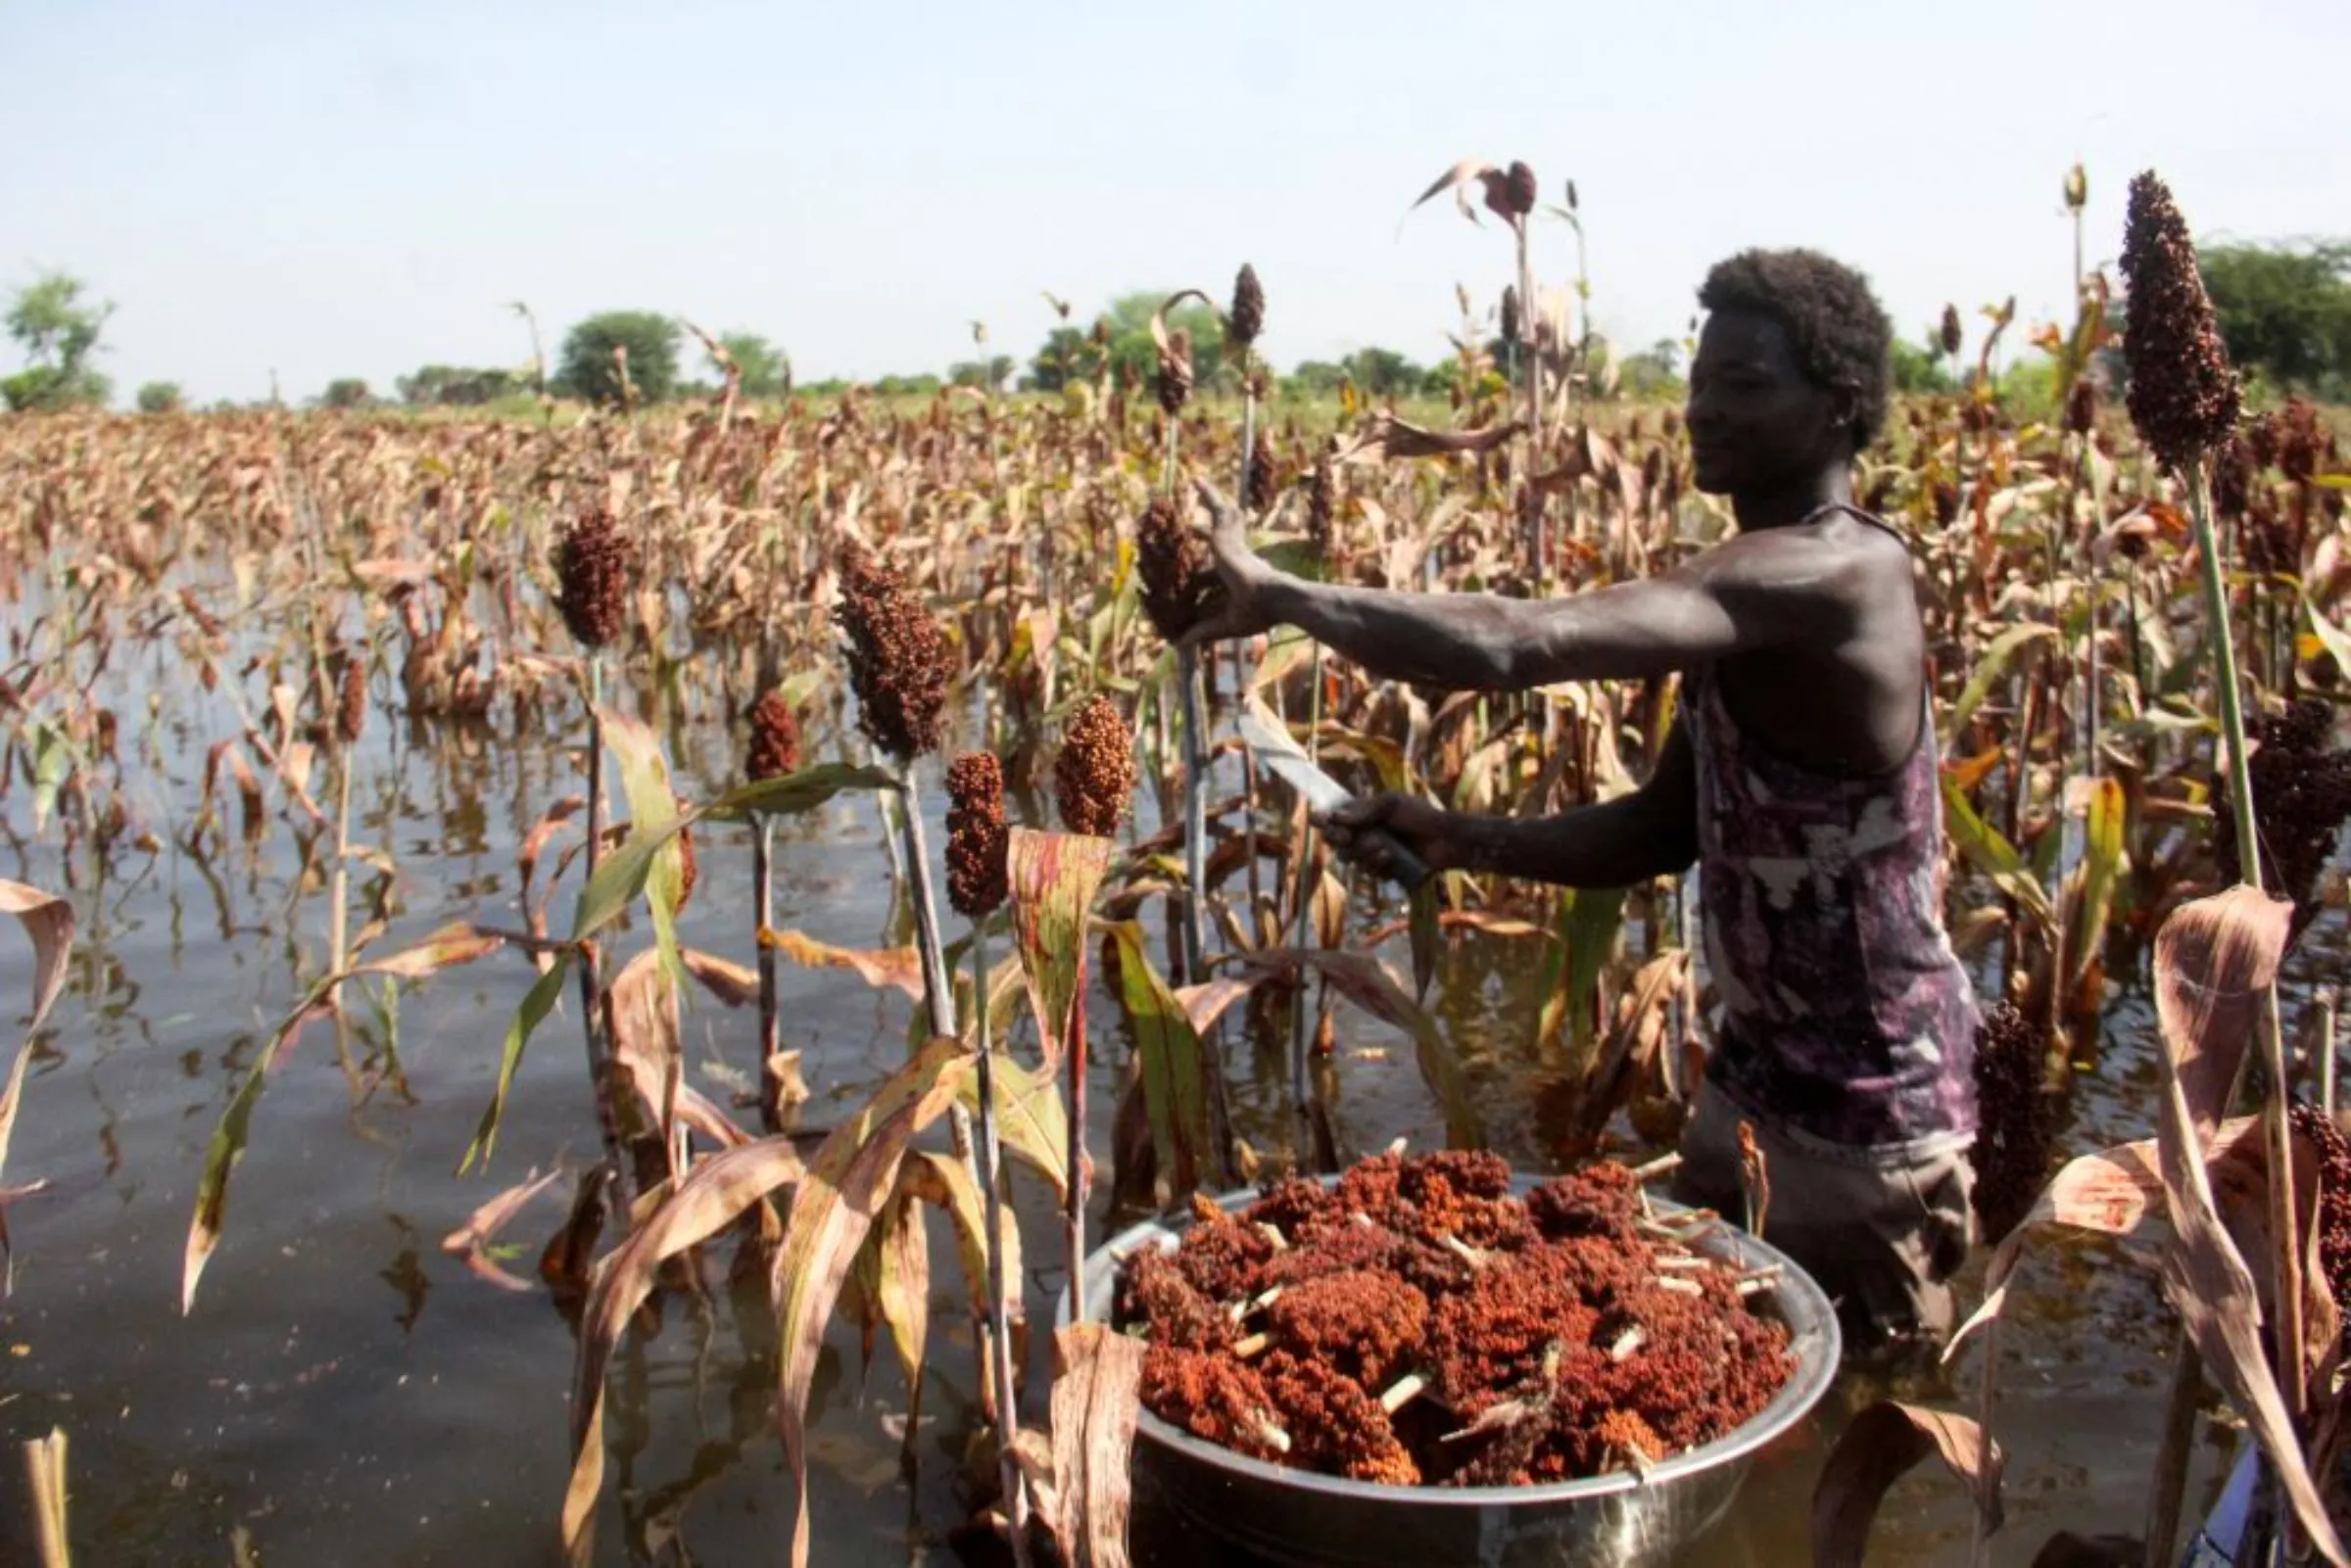 A farmer collects sorghum plant at his submerged red sorghum field after heavy rain in Kournari village, on the outskirts of Ndjamena, Chad October 26, 2022. REUTERS/Mahamat Ramadan